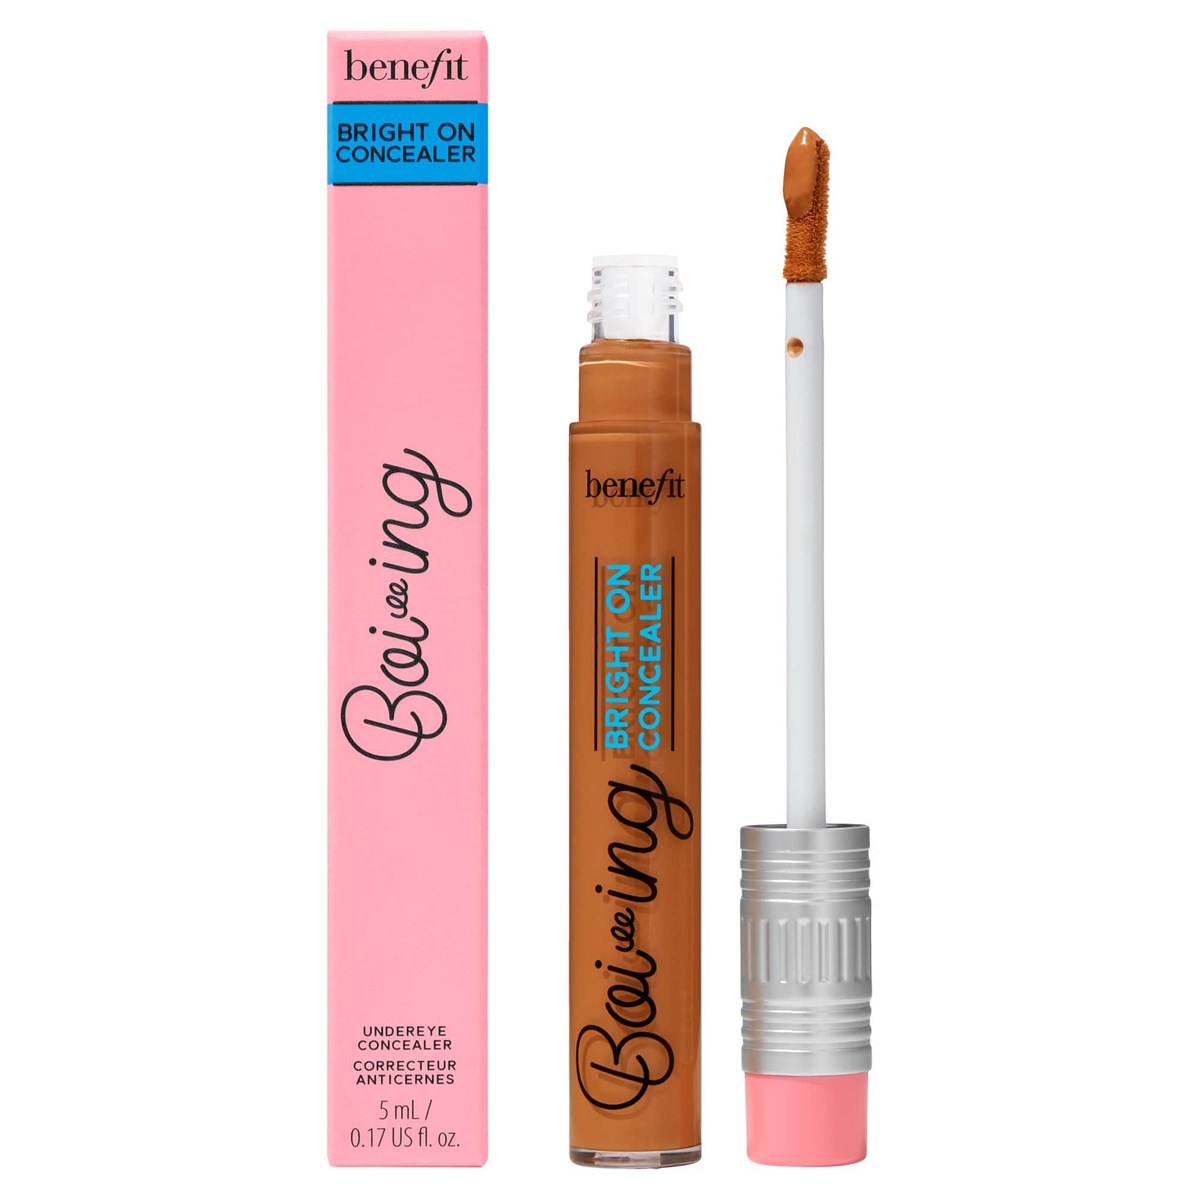 Benefit "Boi-ing Bright On" Concealer Cantaloupe shade